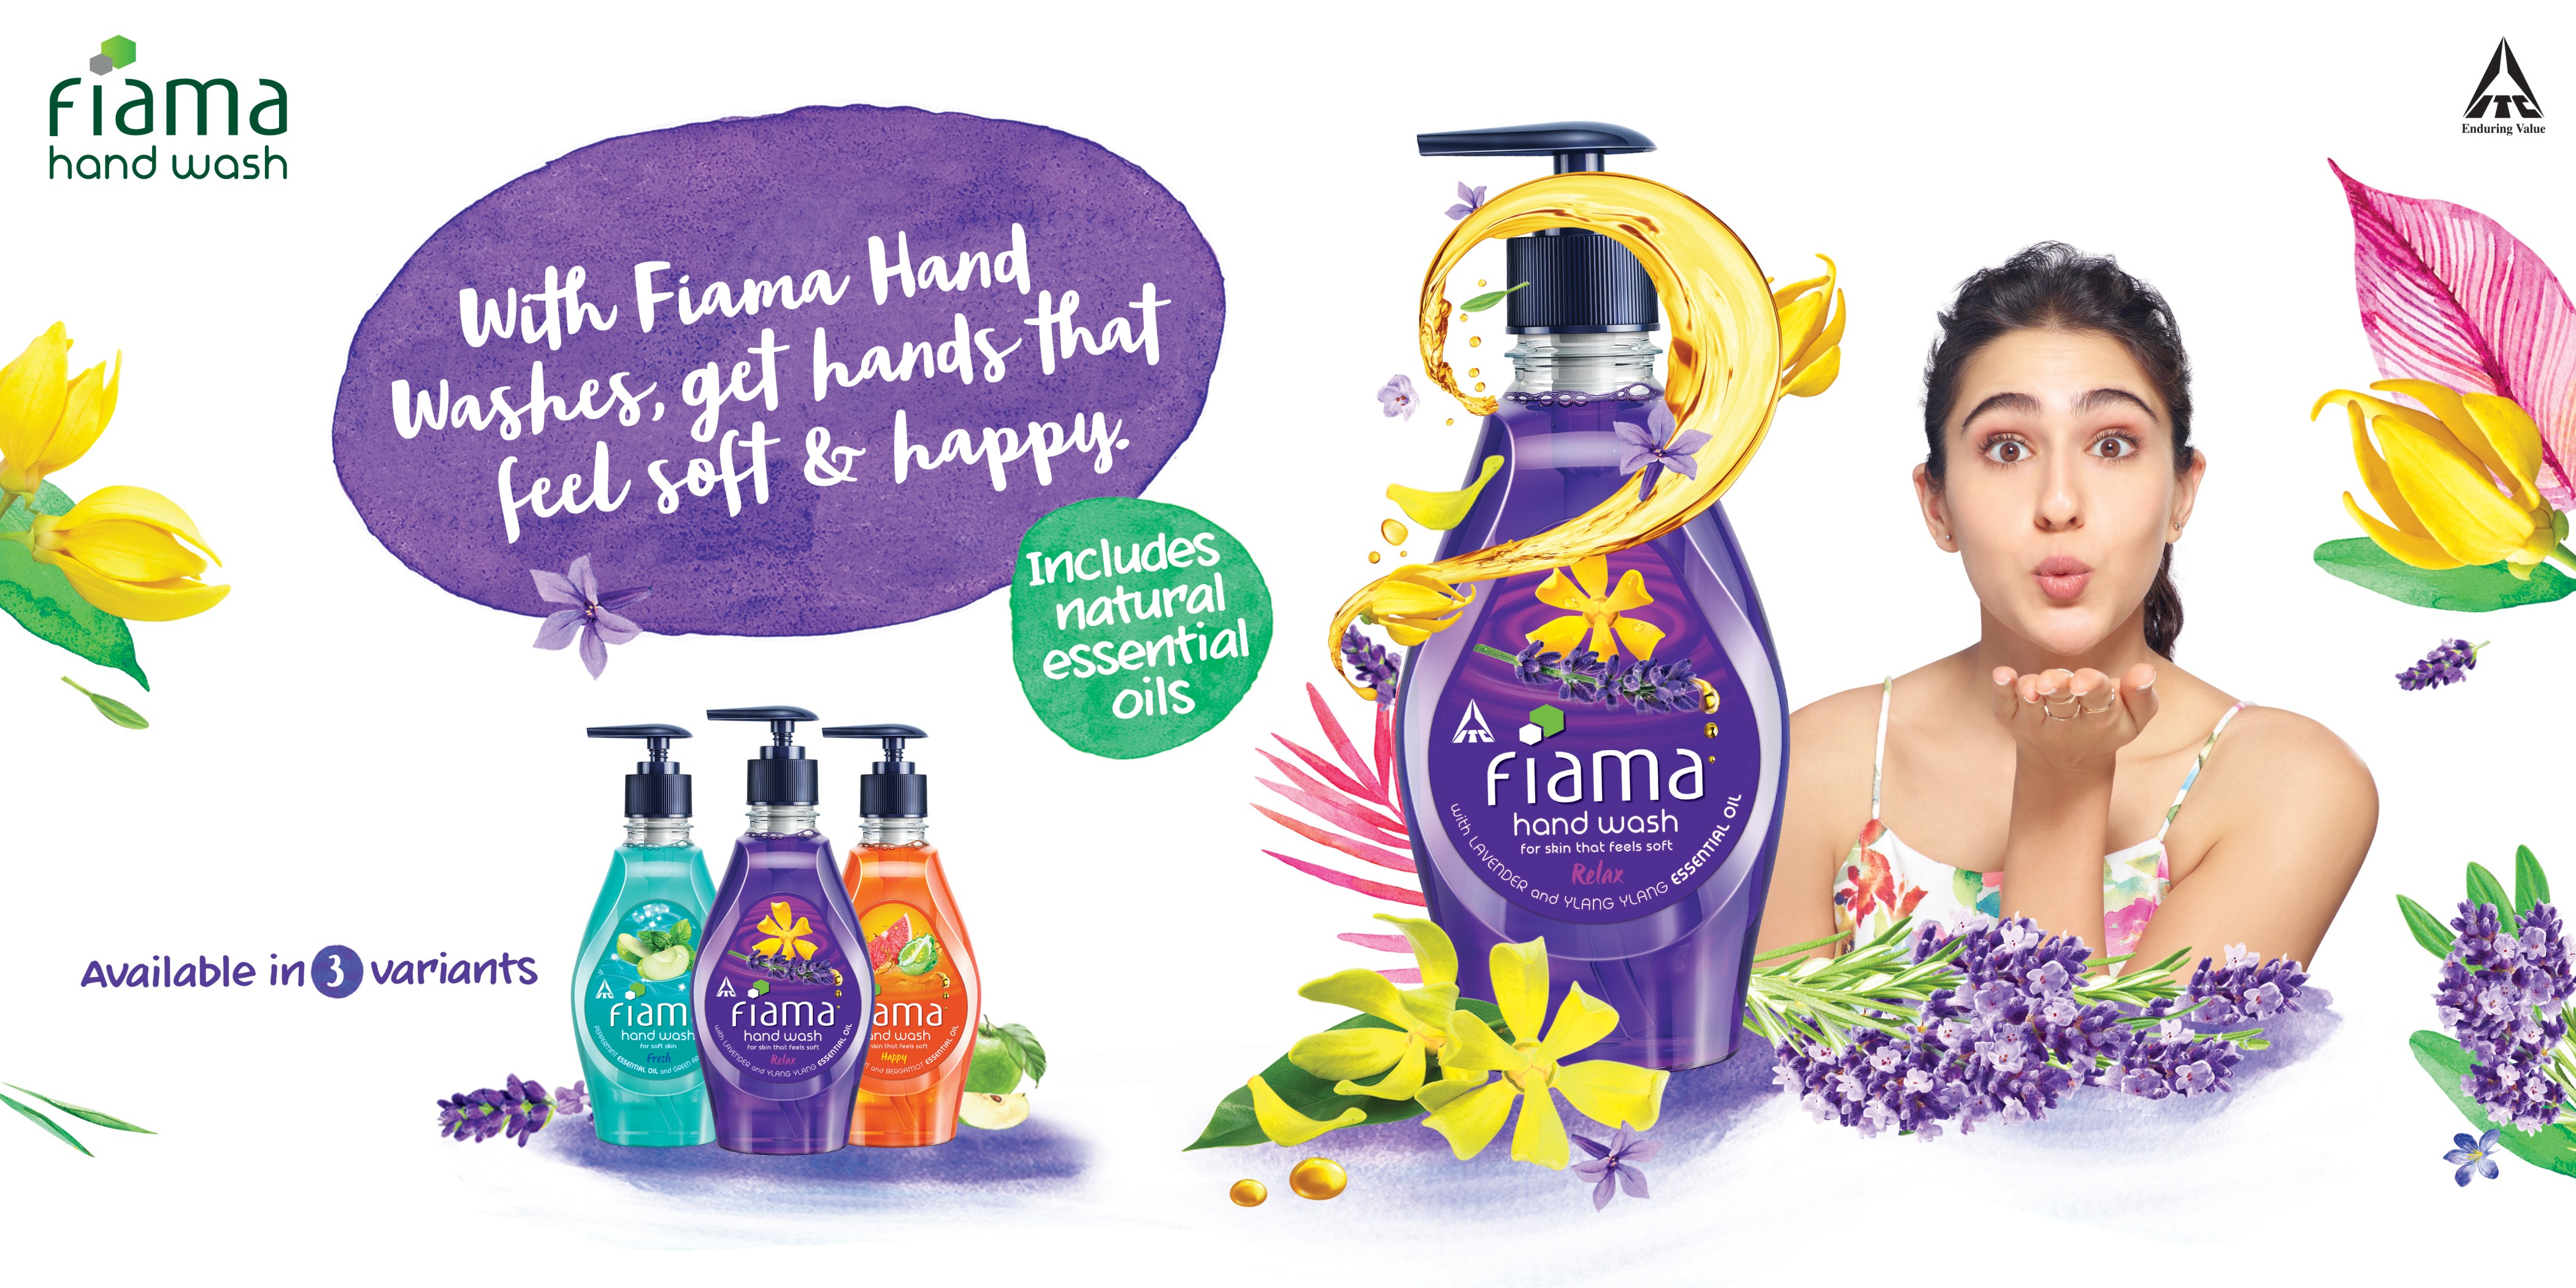 ITC Fiama celebrates Soft & Happy Hands, Launches Fiama Handwashes with Natural essential oils